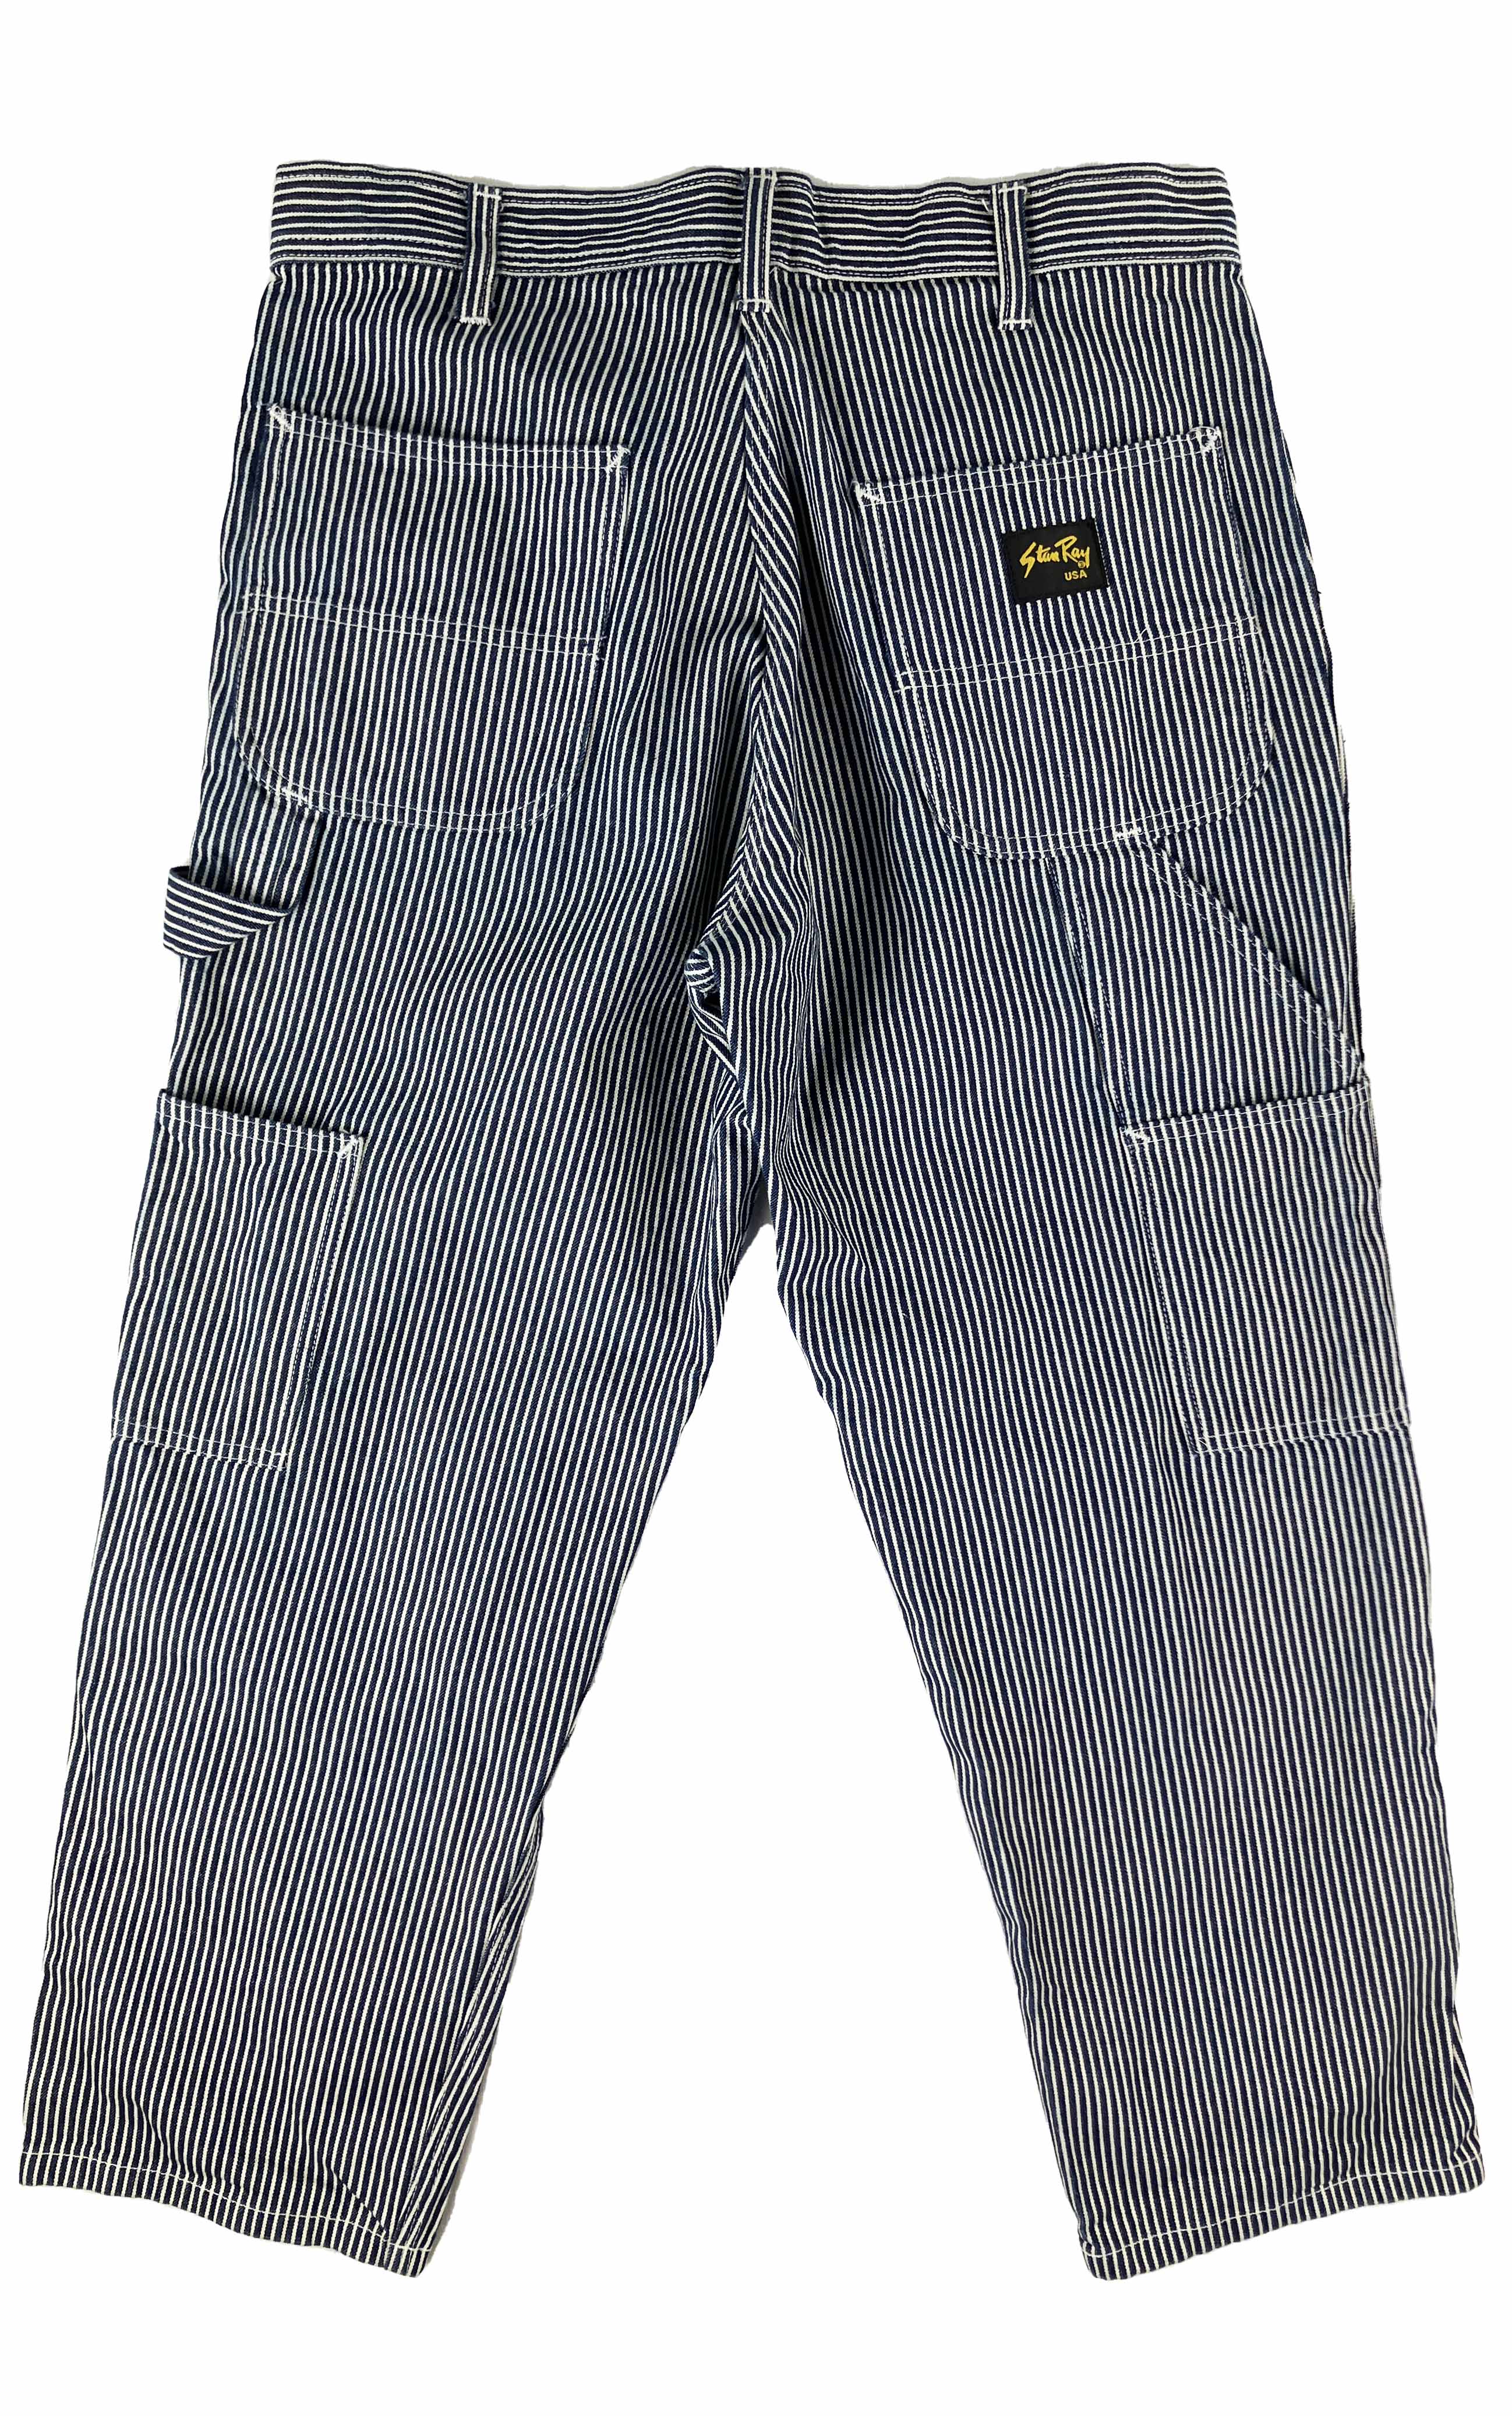 STAN RAY 80s Painter Pant in Hickory Stripe